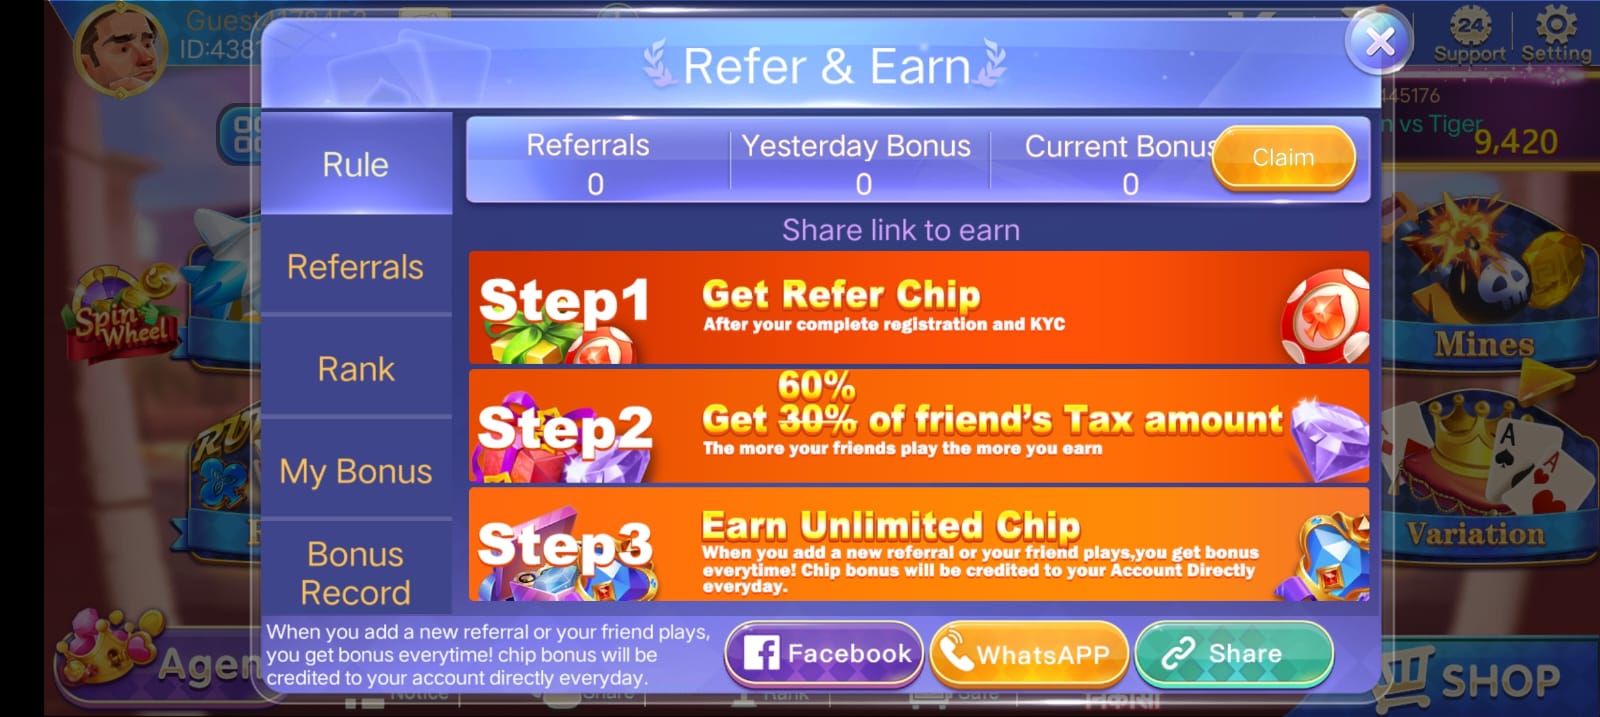 REFER AND EARN IN TEEN PATTI PARTY APP